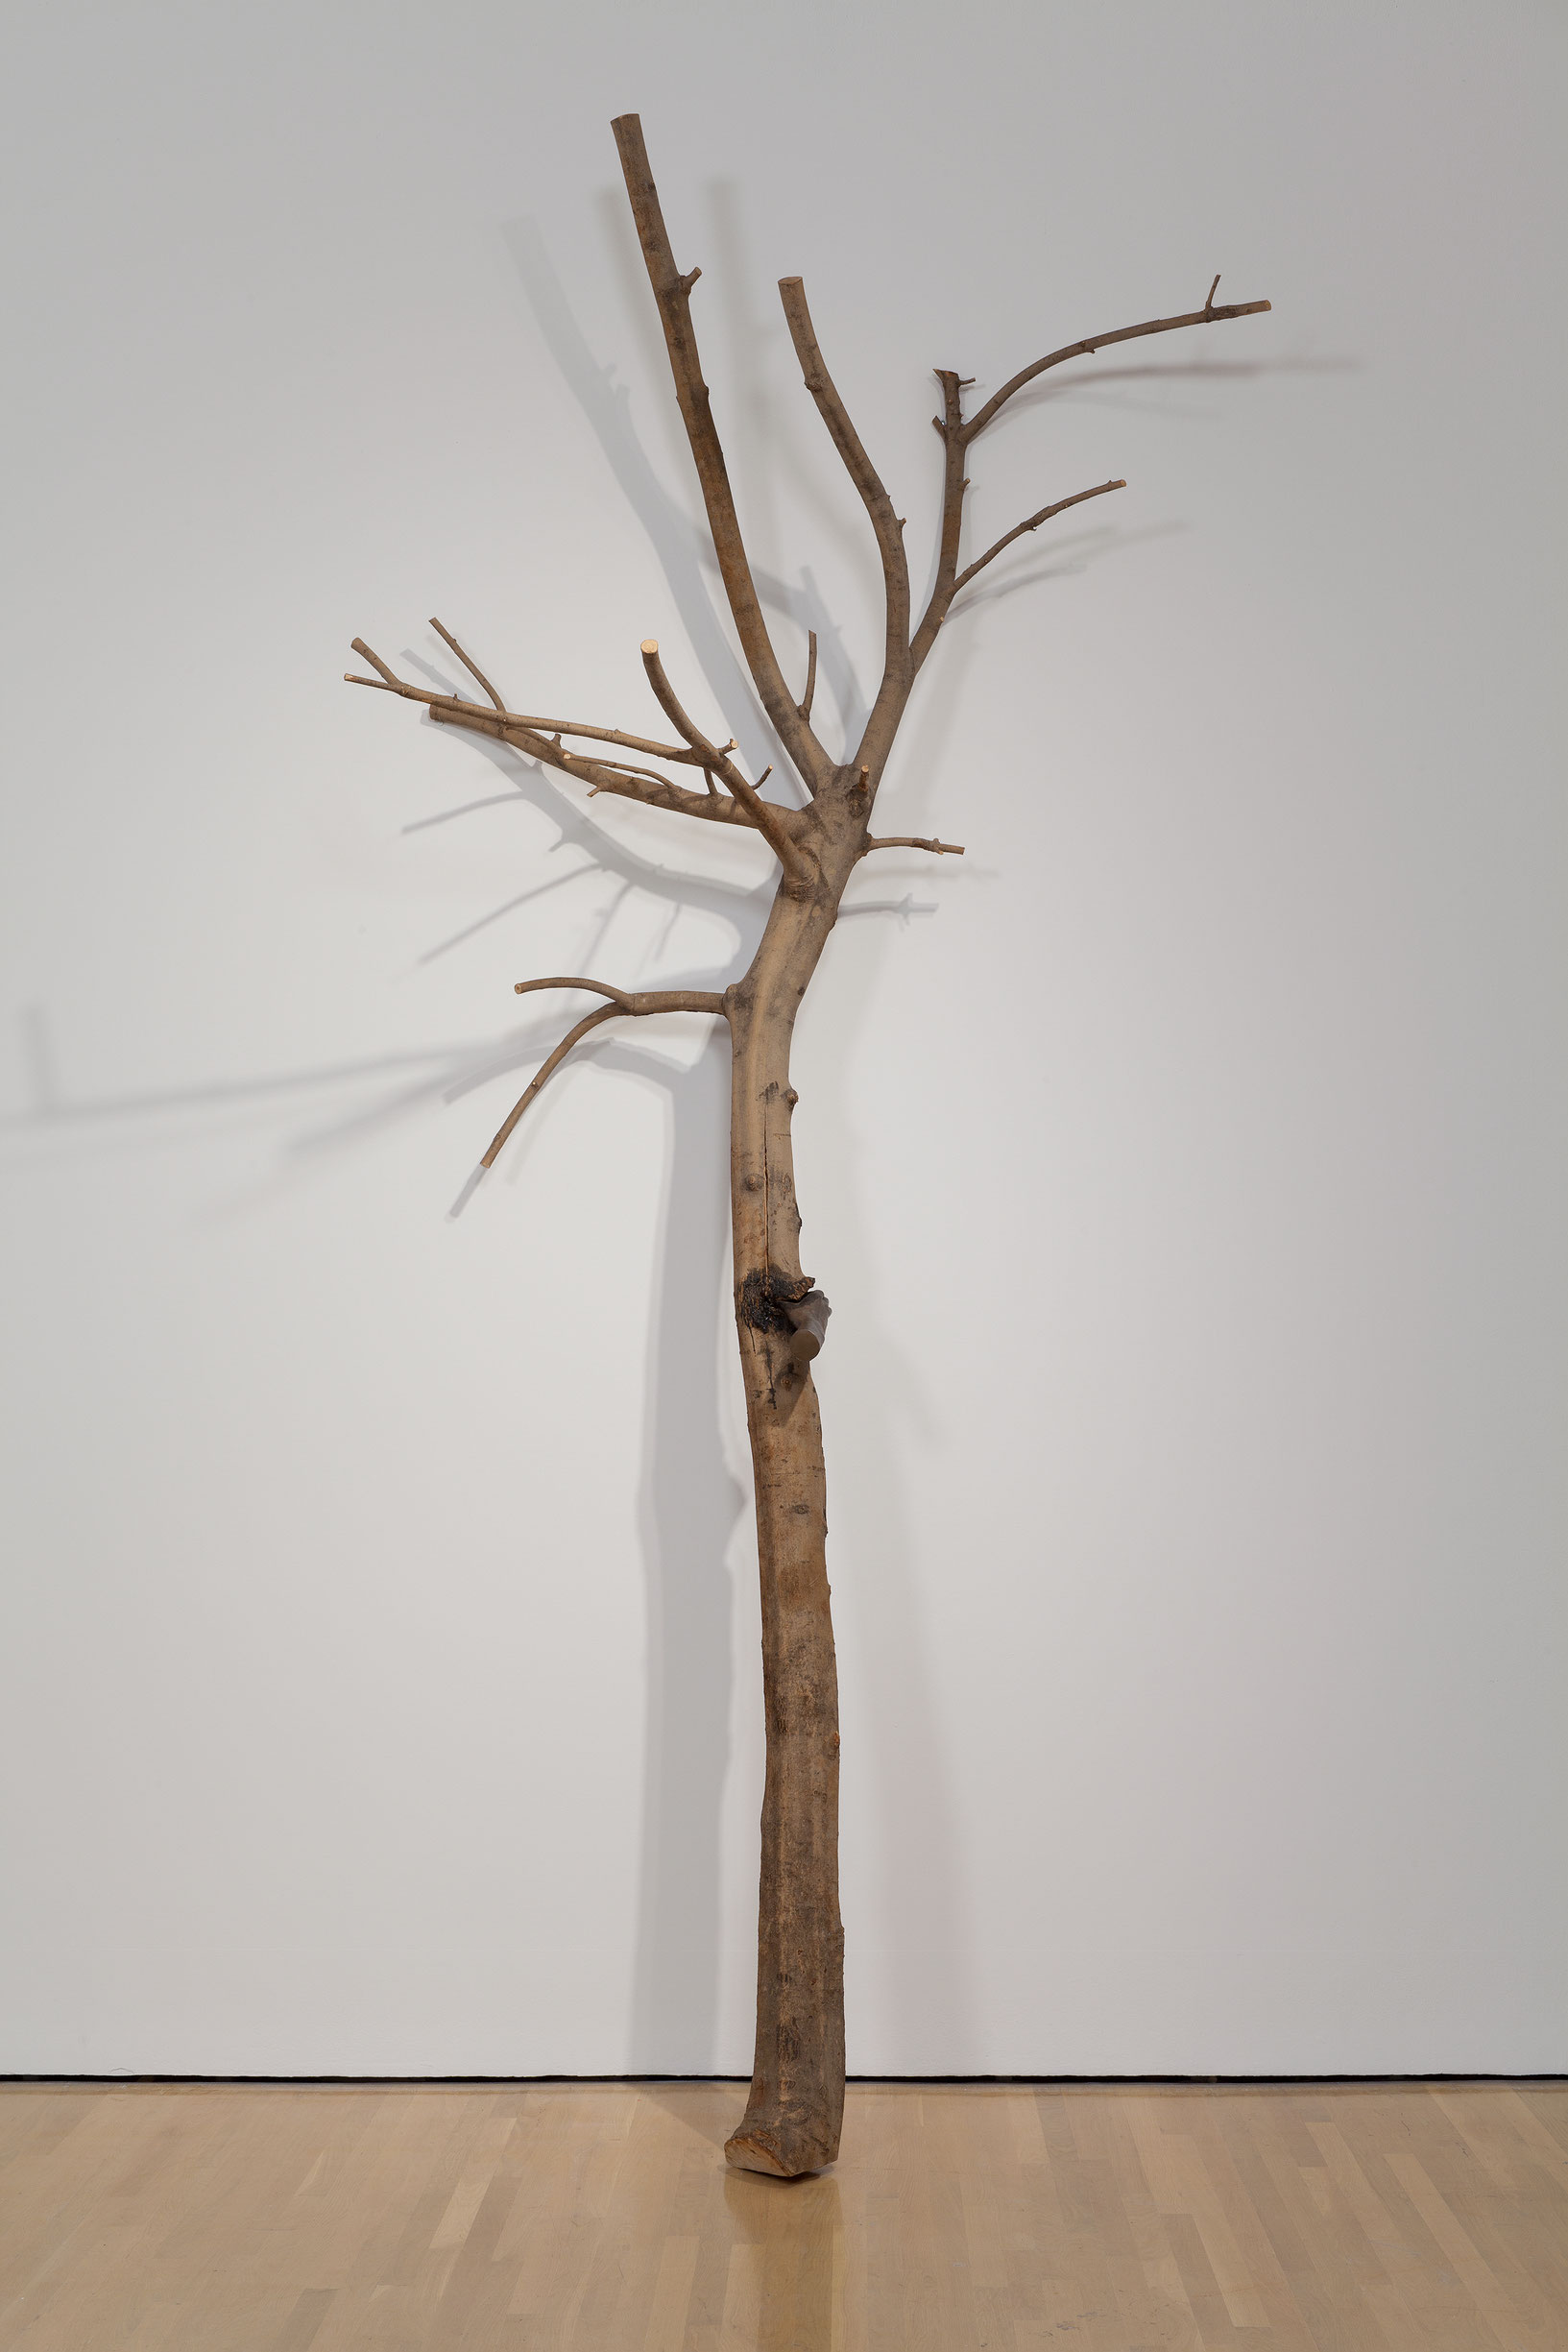 I Have Been a Tree in the Hand, 1984-1991, Giuseppe Penone, Bois et fer.